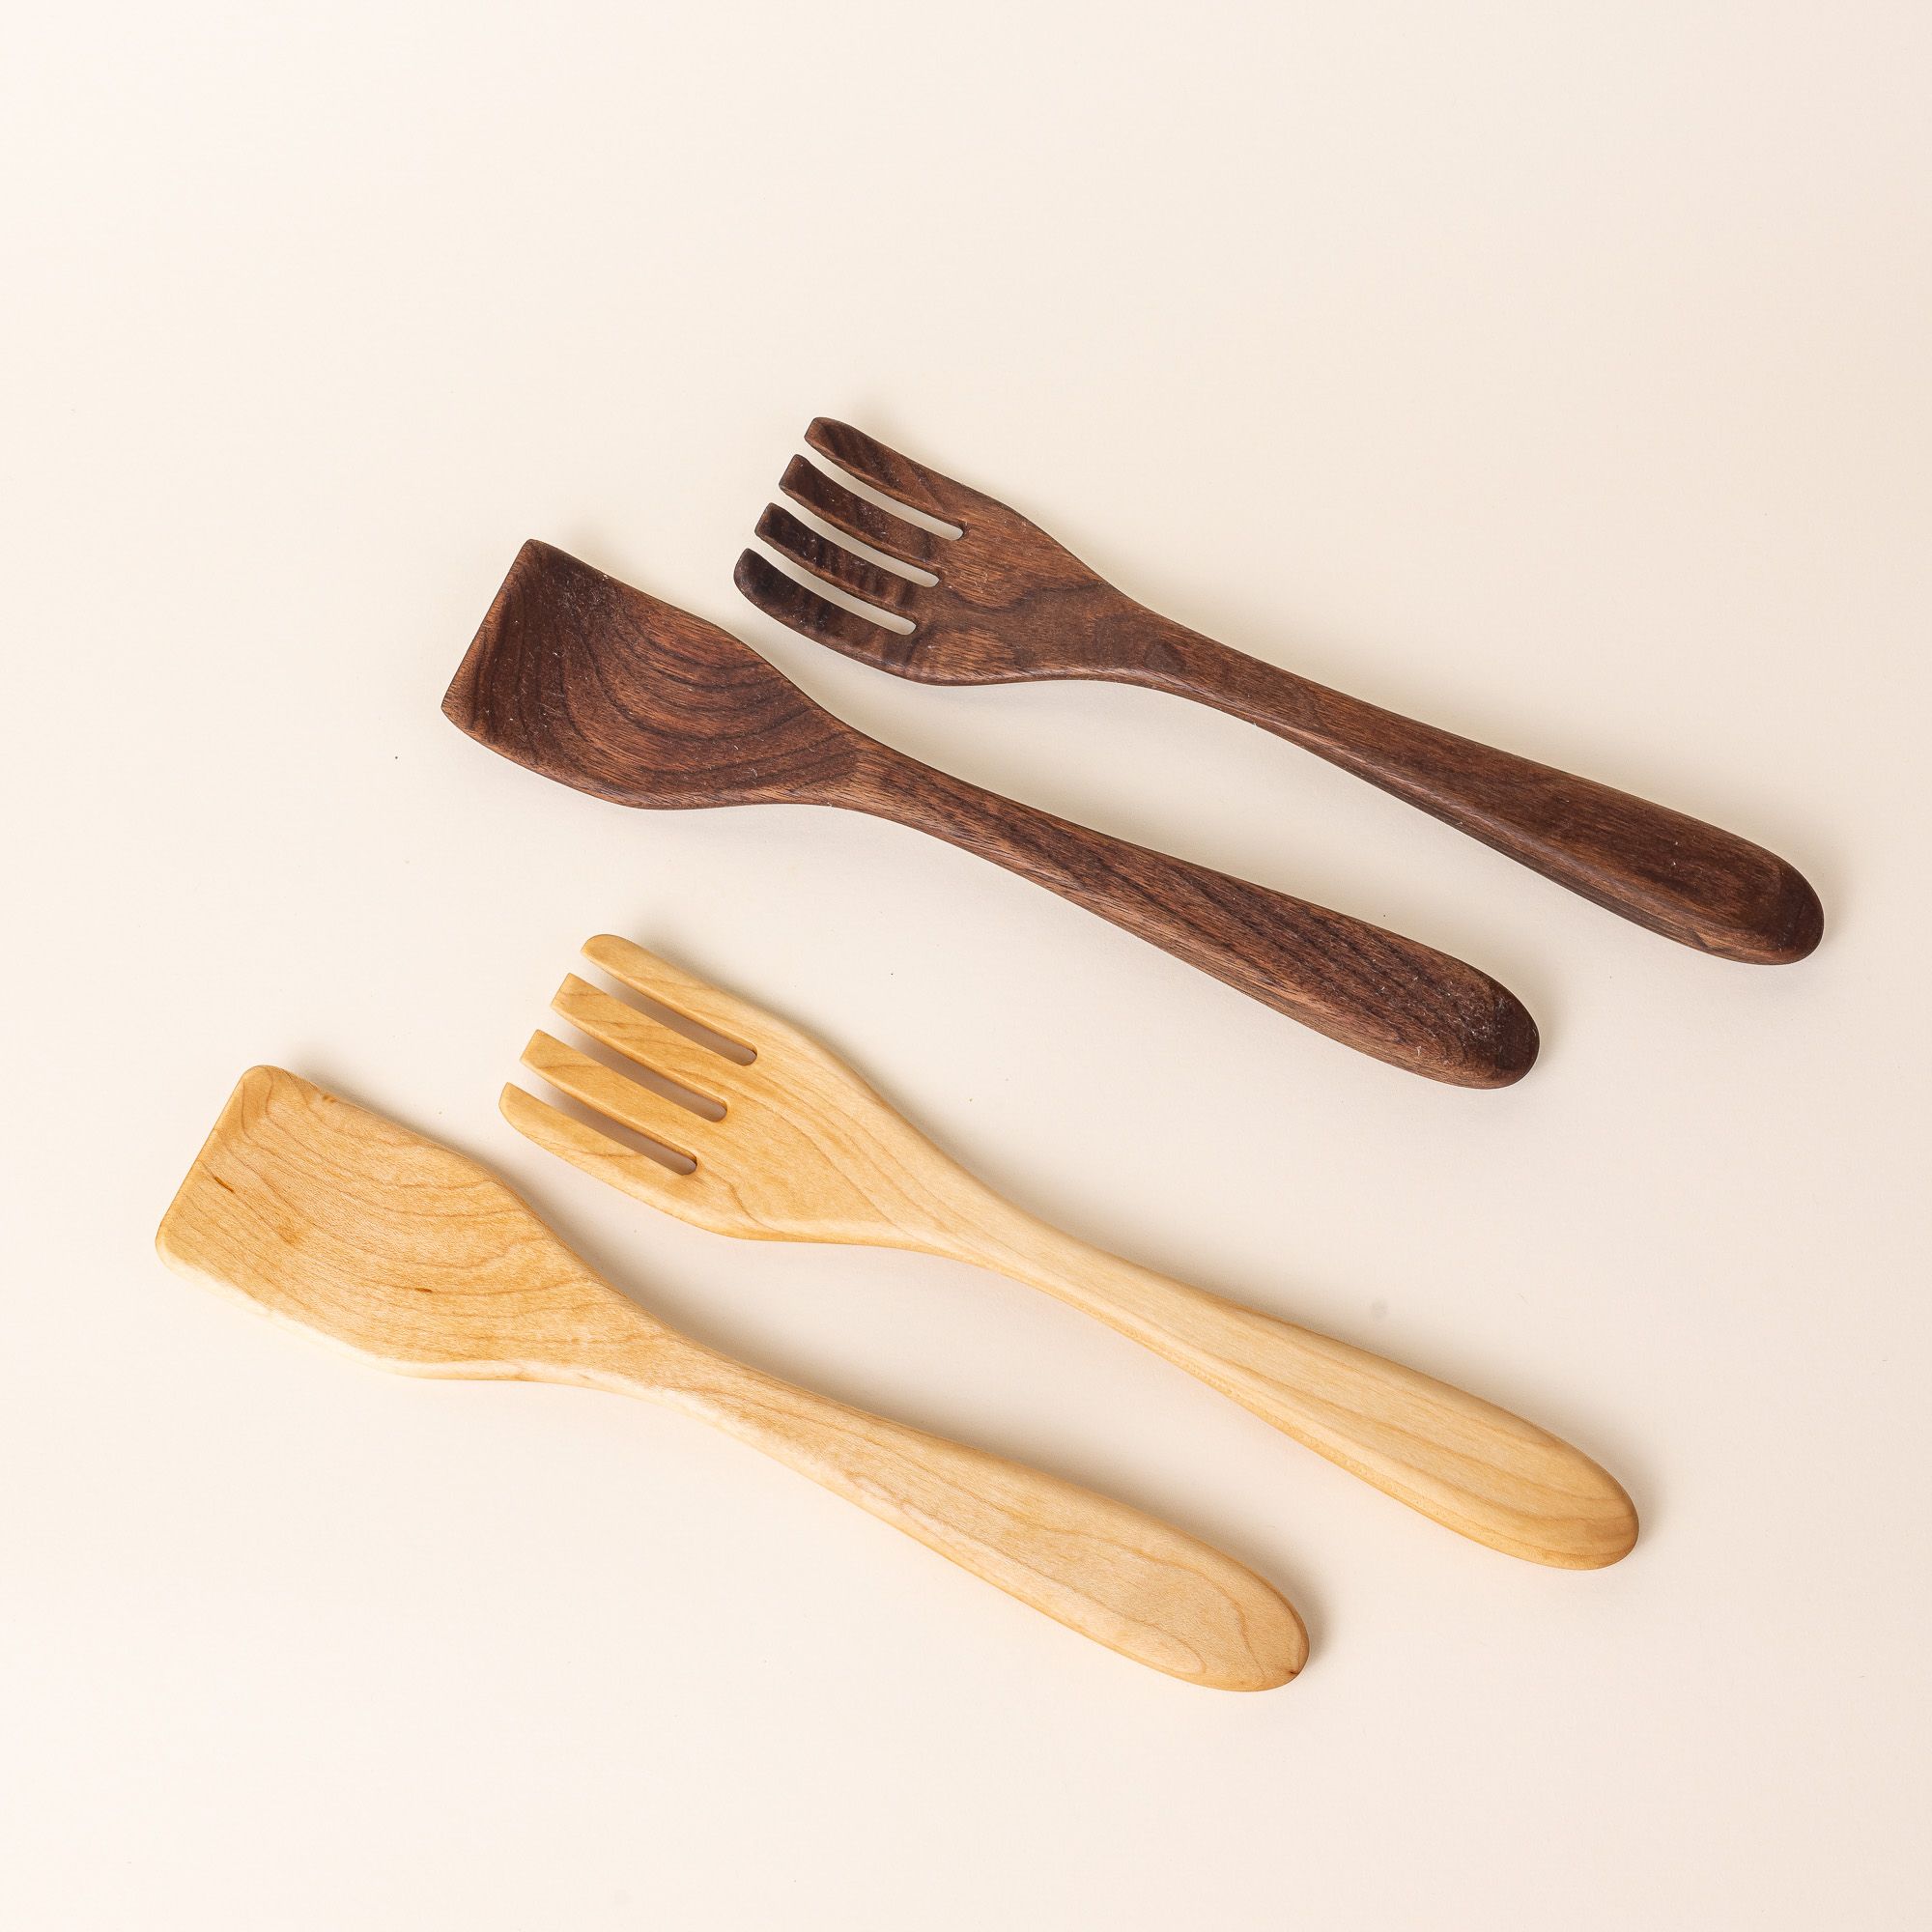 Two pairs of long wood serving utensils in maple and walnut woods. The left utensil has a shape like a spatula, the right has a shape like a fork.